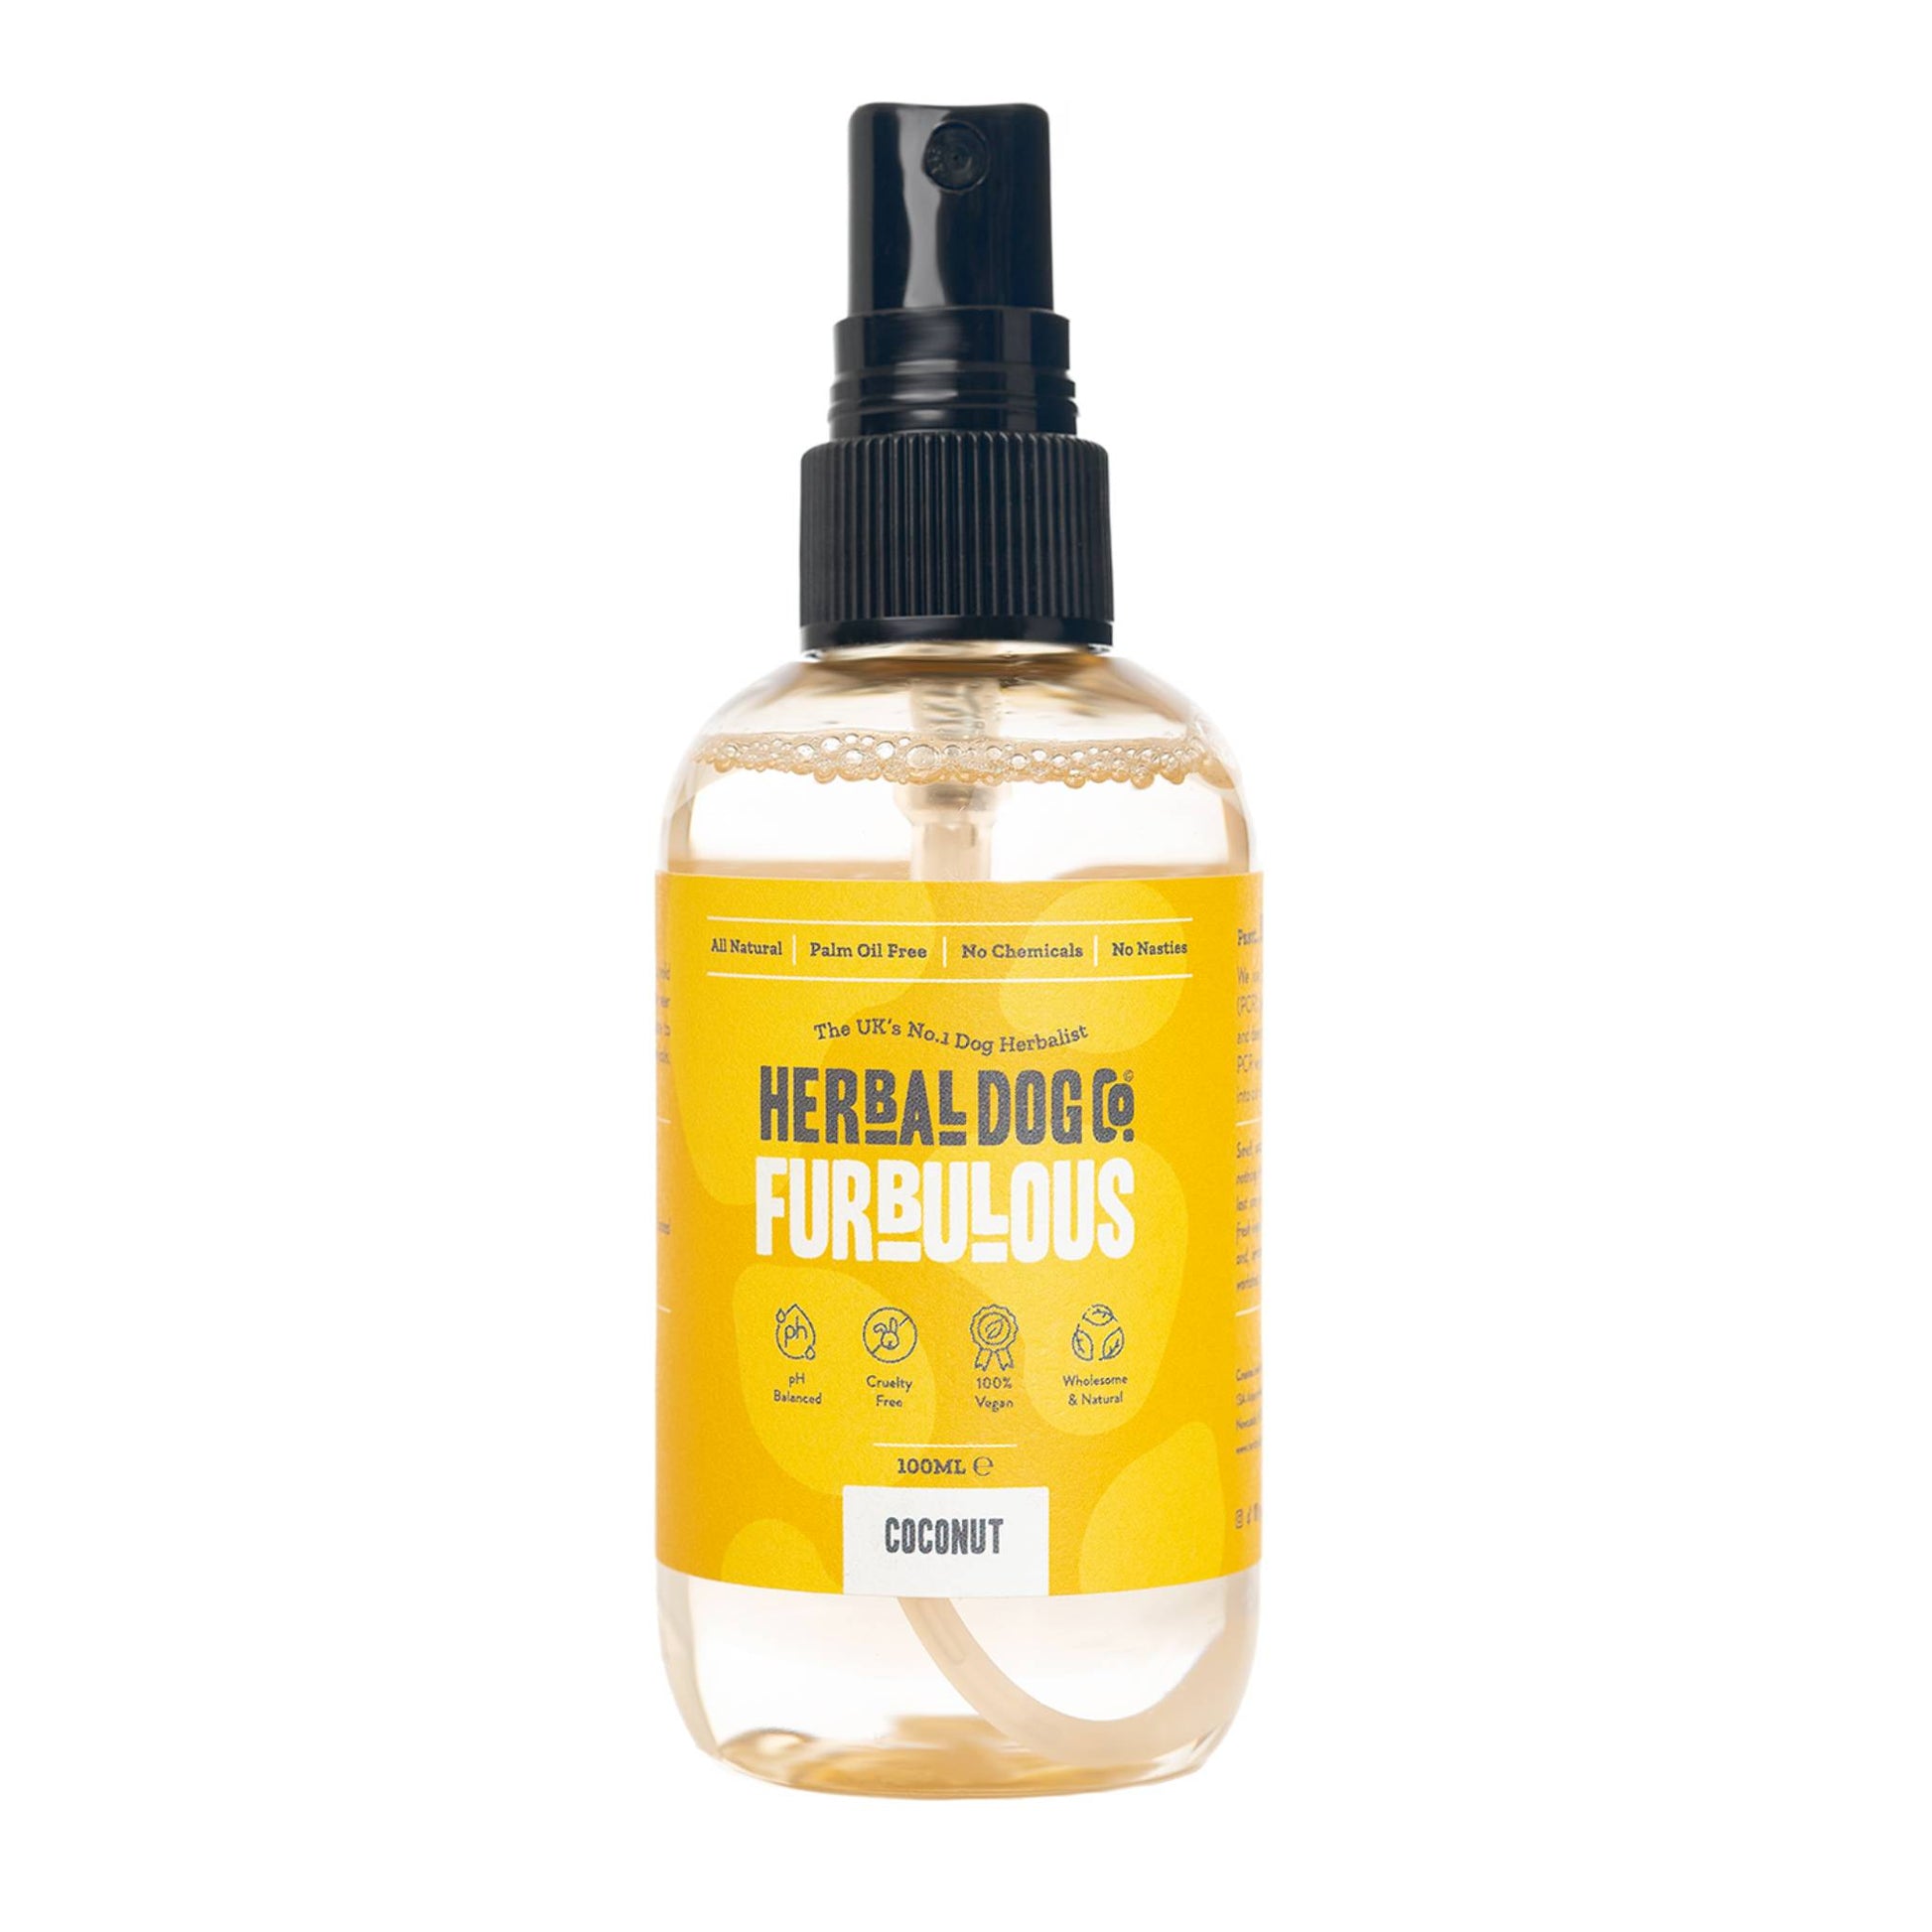 Herbal Dog Co Furbulous Cologne Coconut